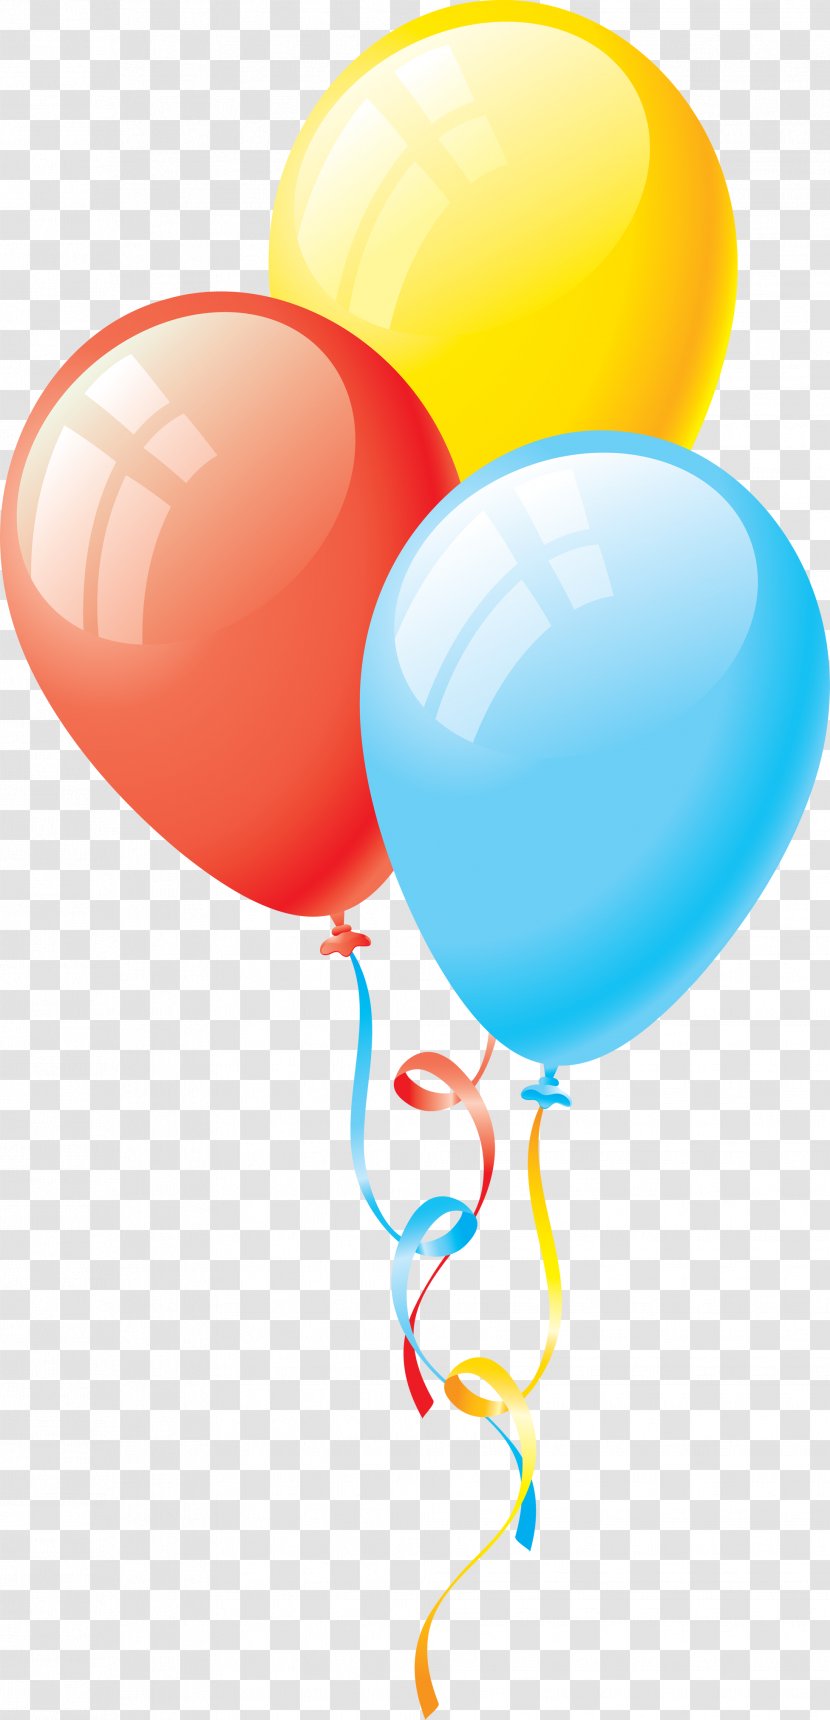 Balloon Clip Art - Party Supply - Balloons 5 Transparent PNG